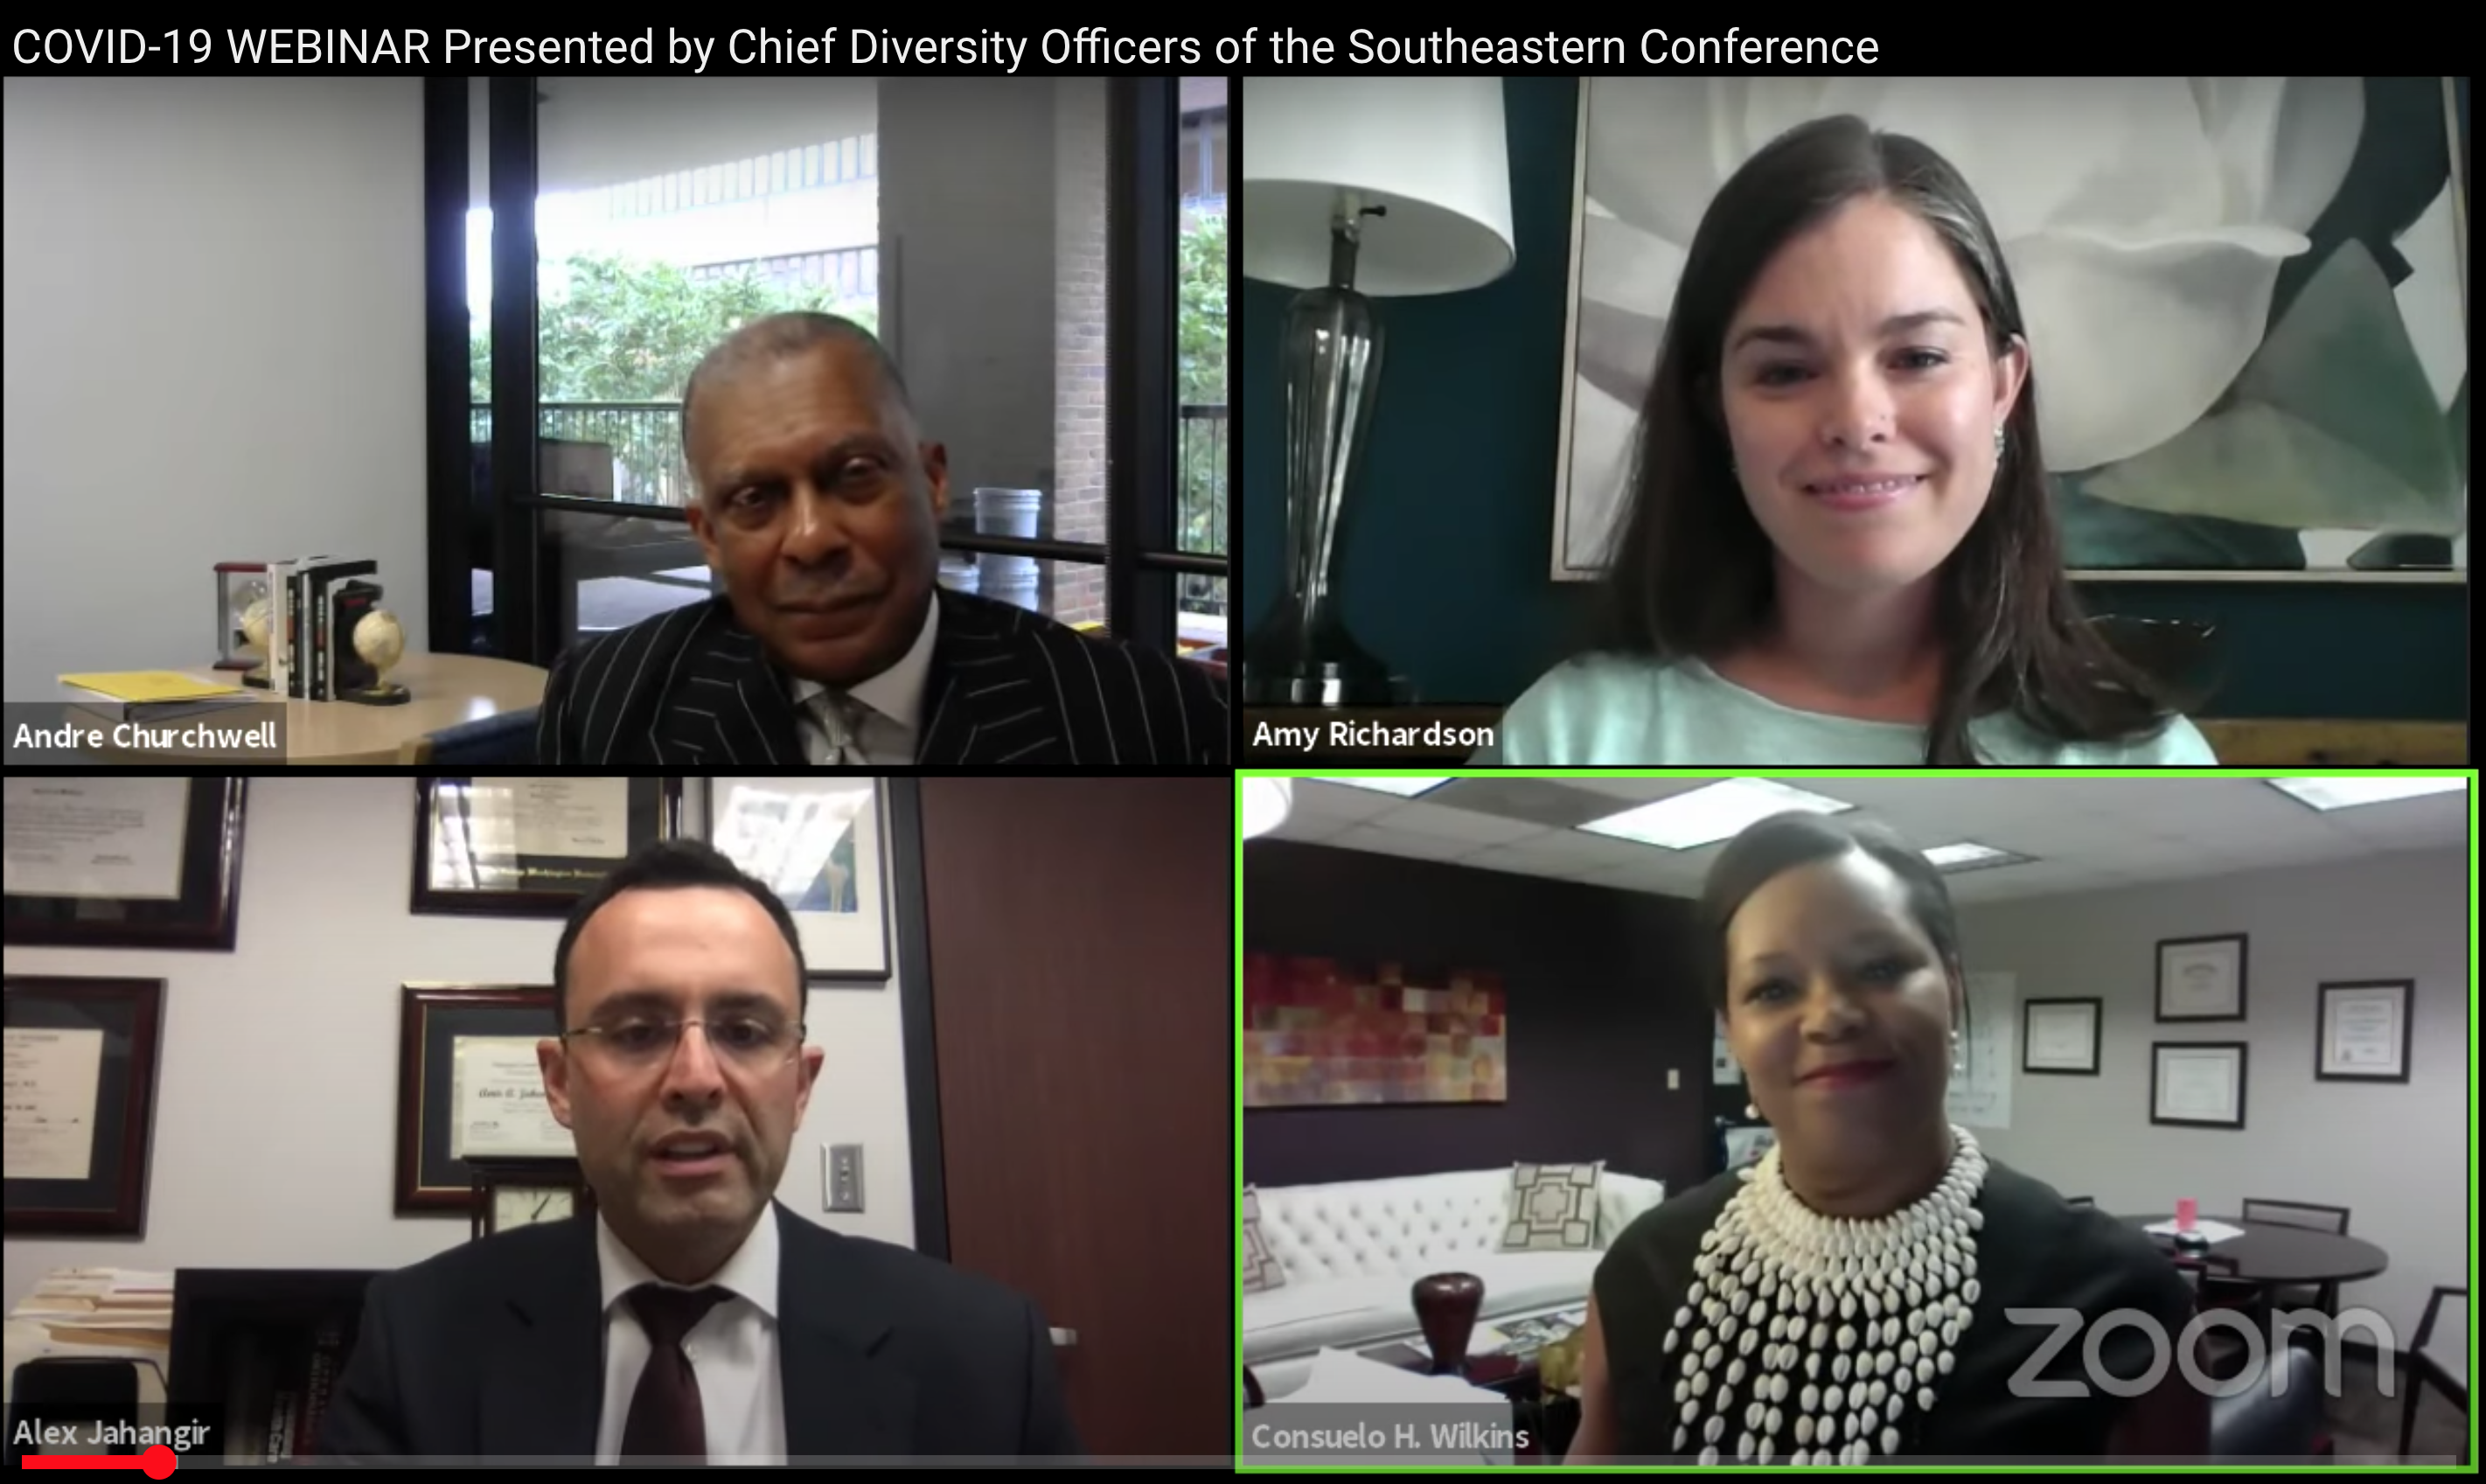 A screenshot of four speakers (Andre Churchwell, Amy Richardson, Alex Jahangir and Conseulo Wilkins)